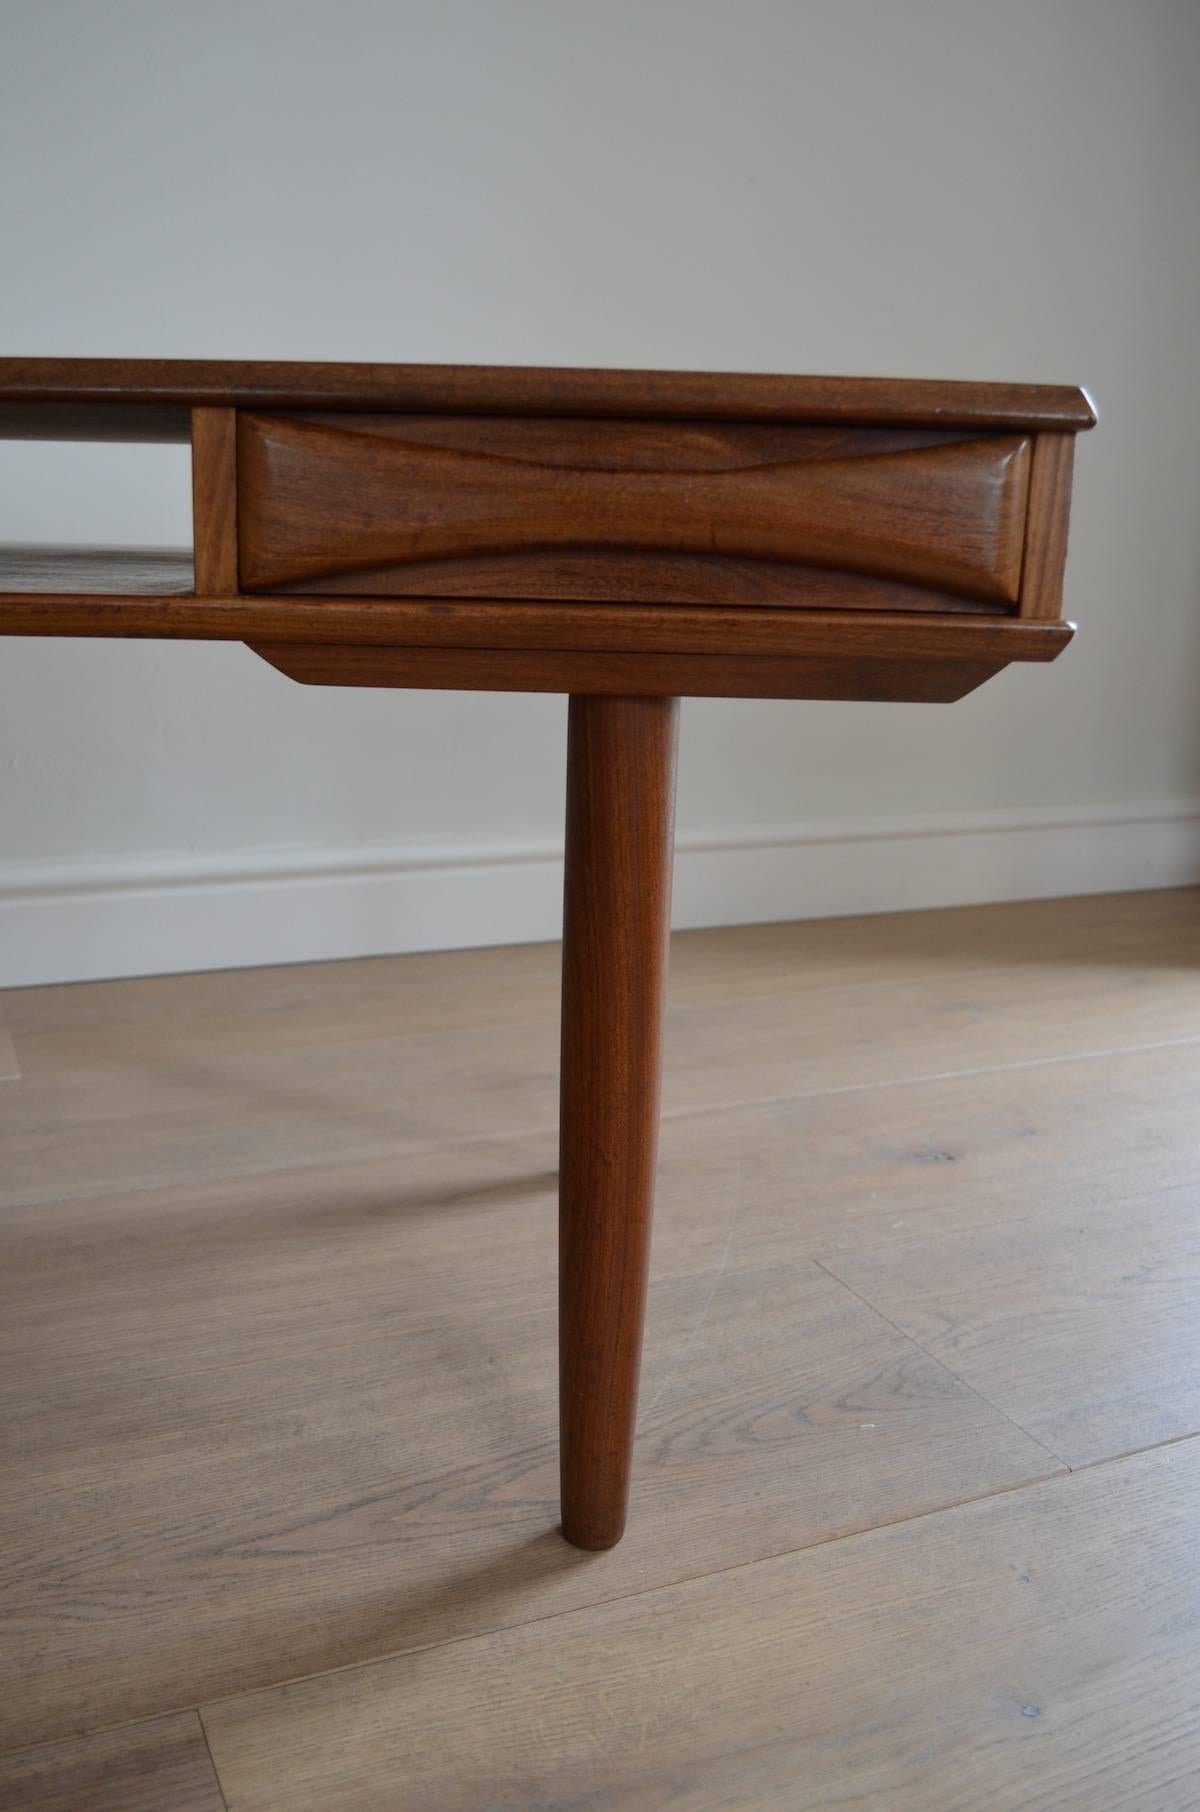 Arne Vodder Danish Teak Coffee Table, 1950s In Excellent Condition For Sale In London, Greater London